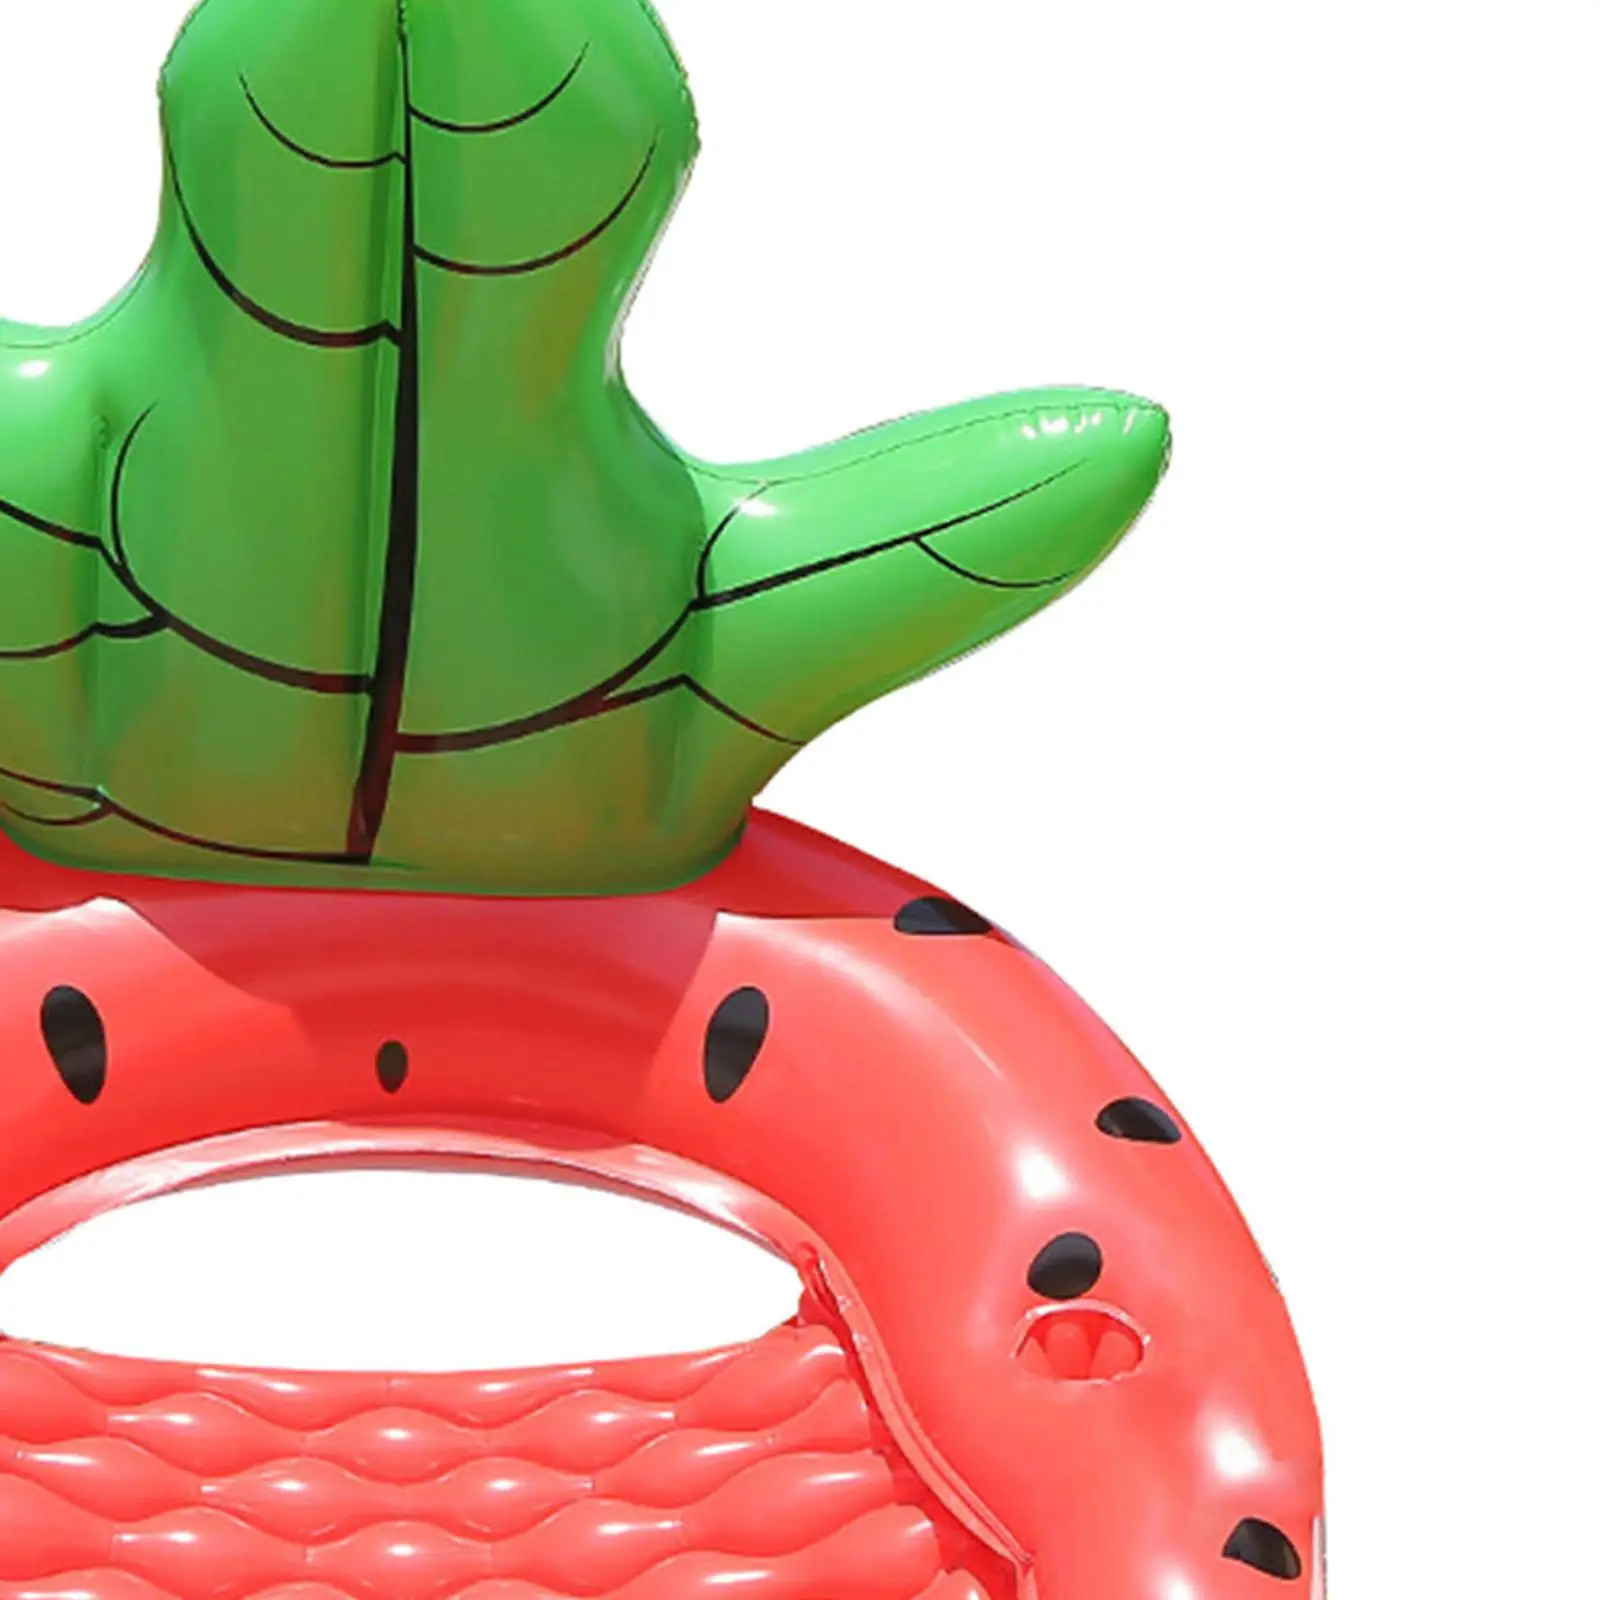 Watermelon Inflatable Pool Float, Water Hammock Float with Handles Water Mattress Mat Lake Raft for Kids Adult